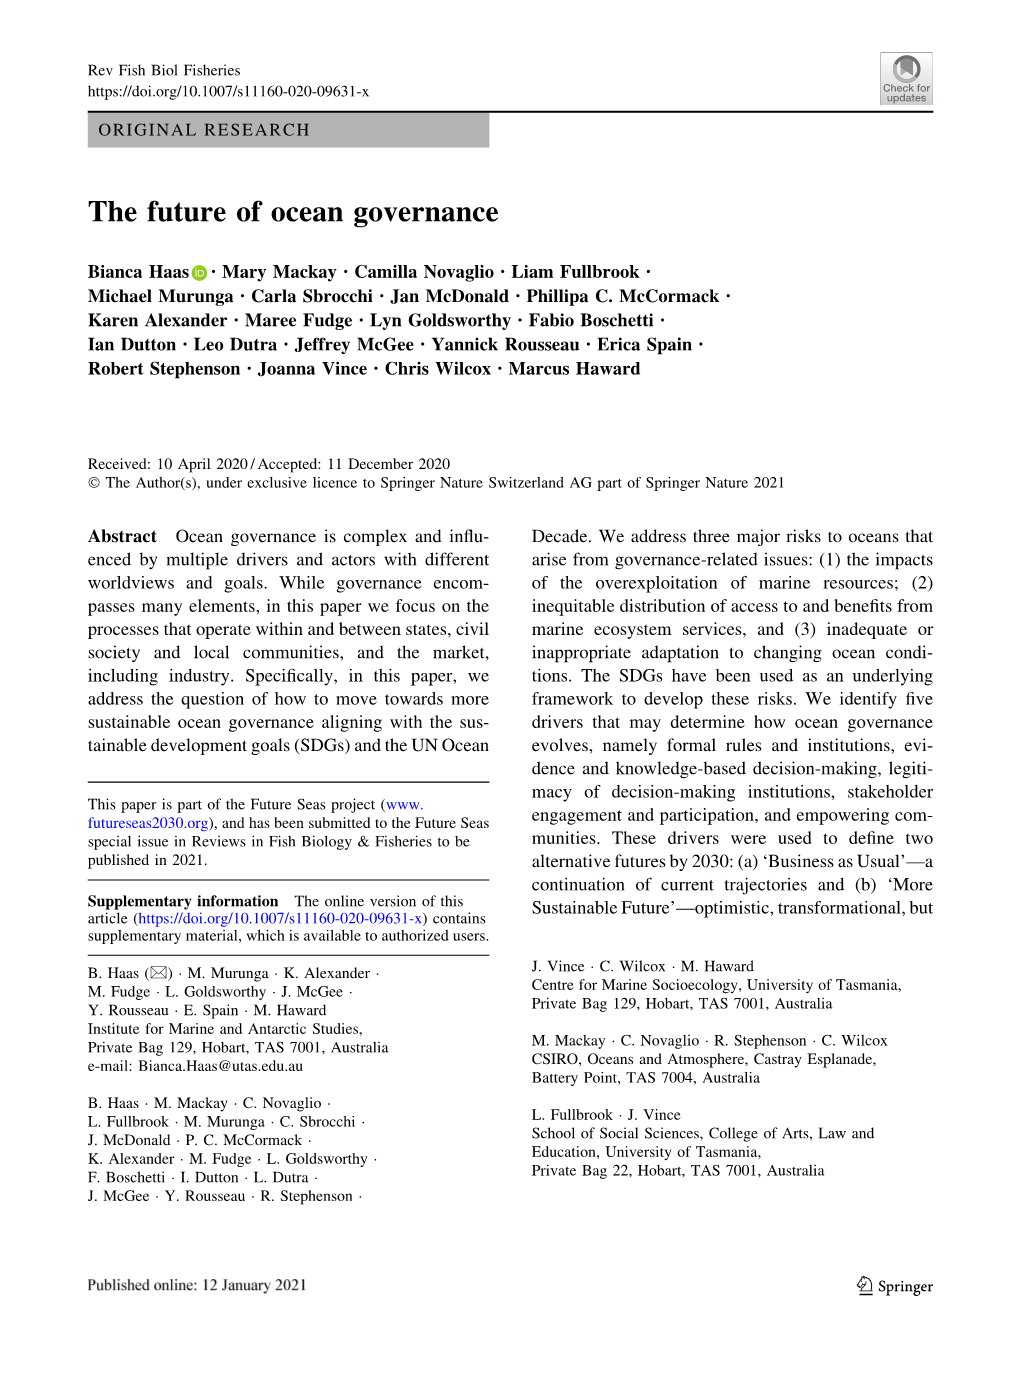 The Future of Ocean Governance